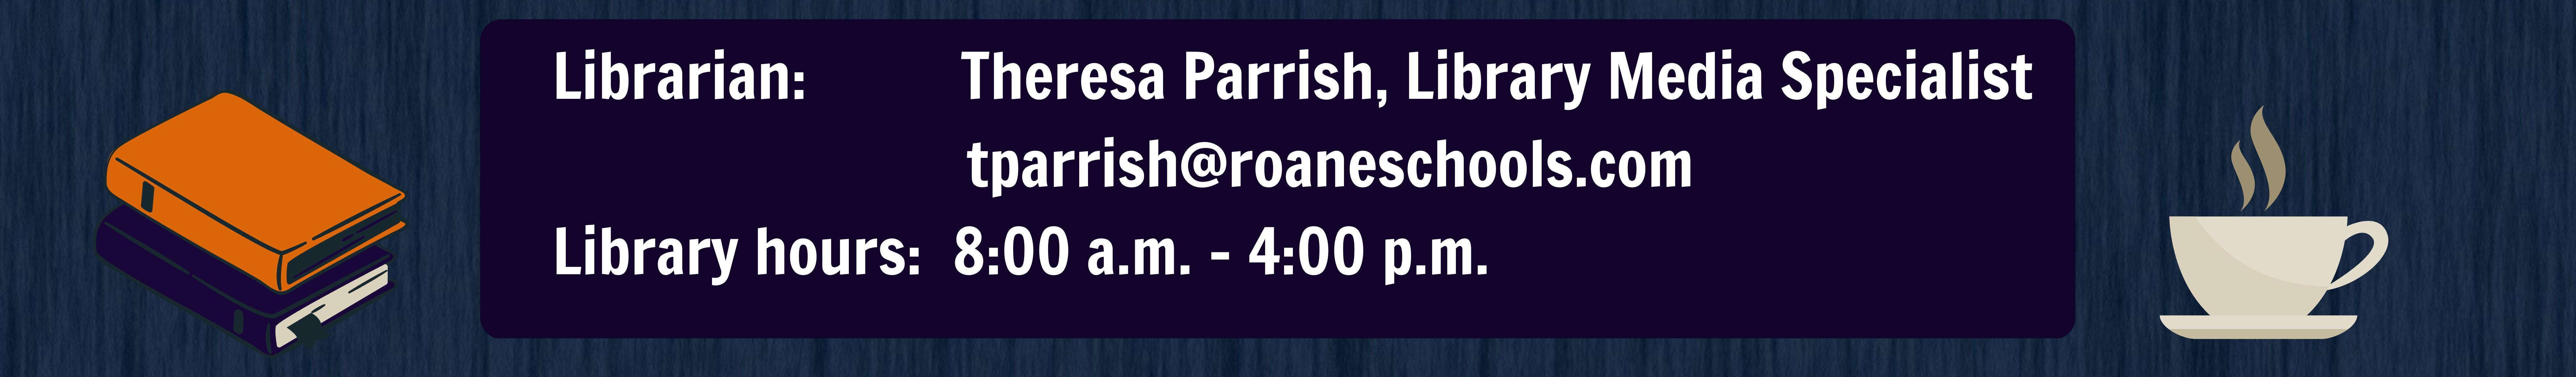 Library Staff and Library Hours